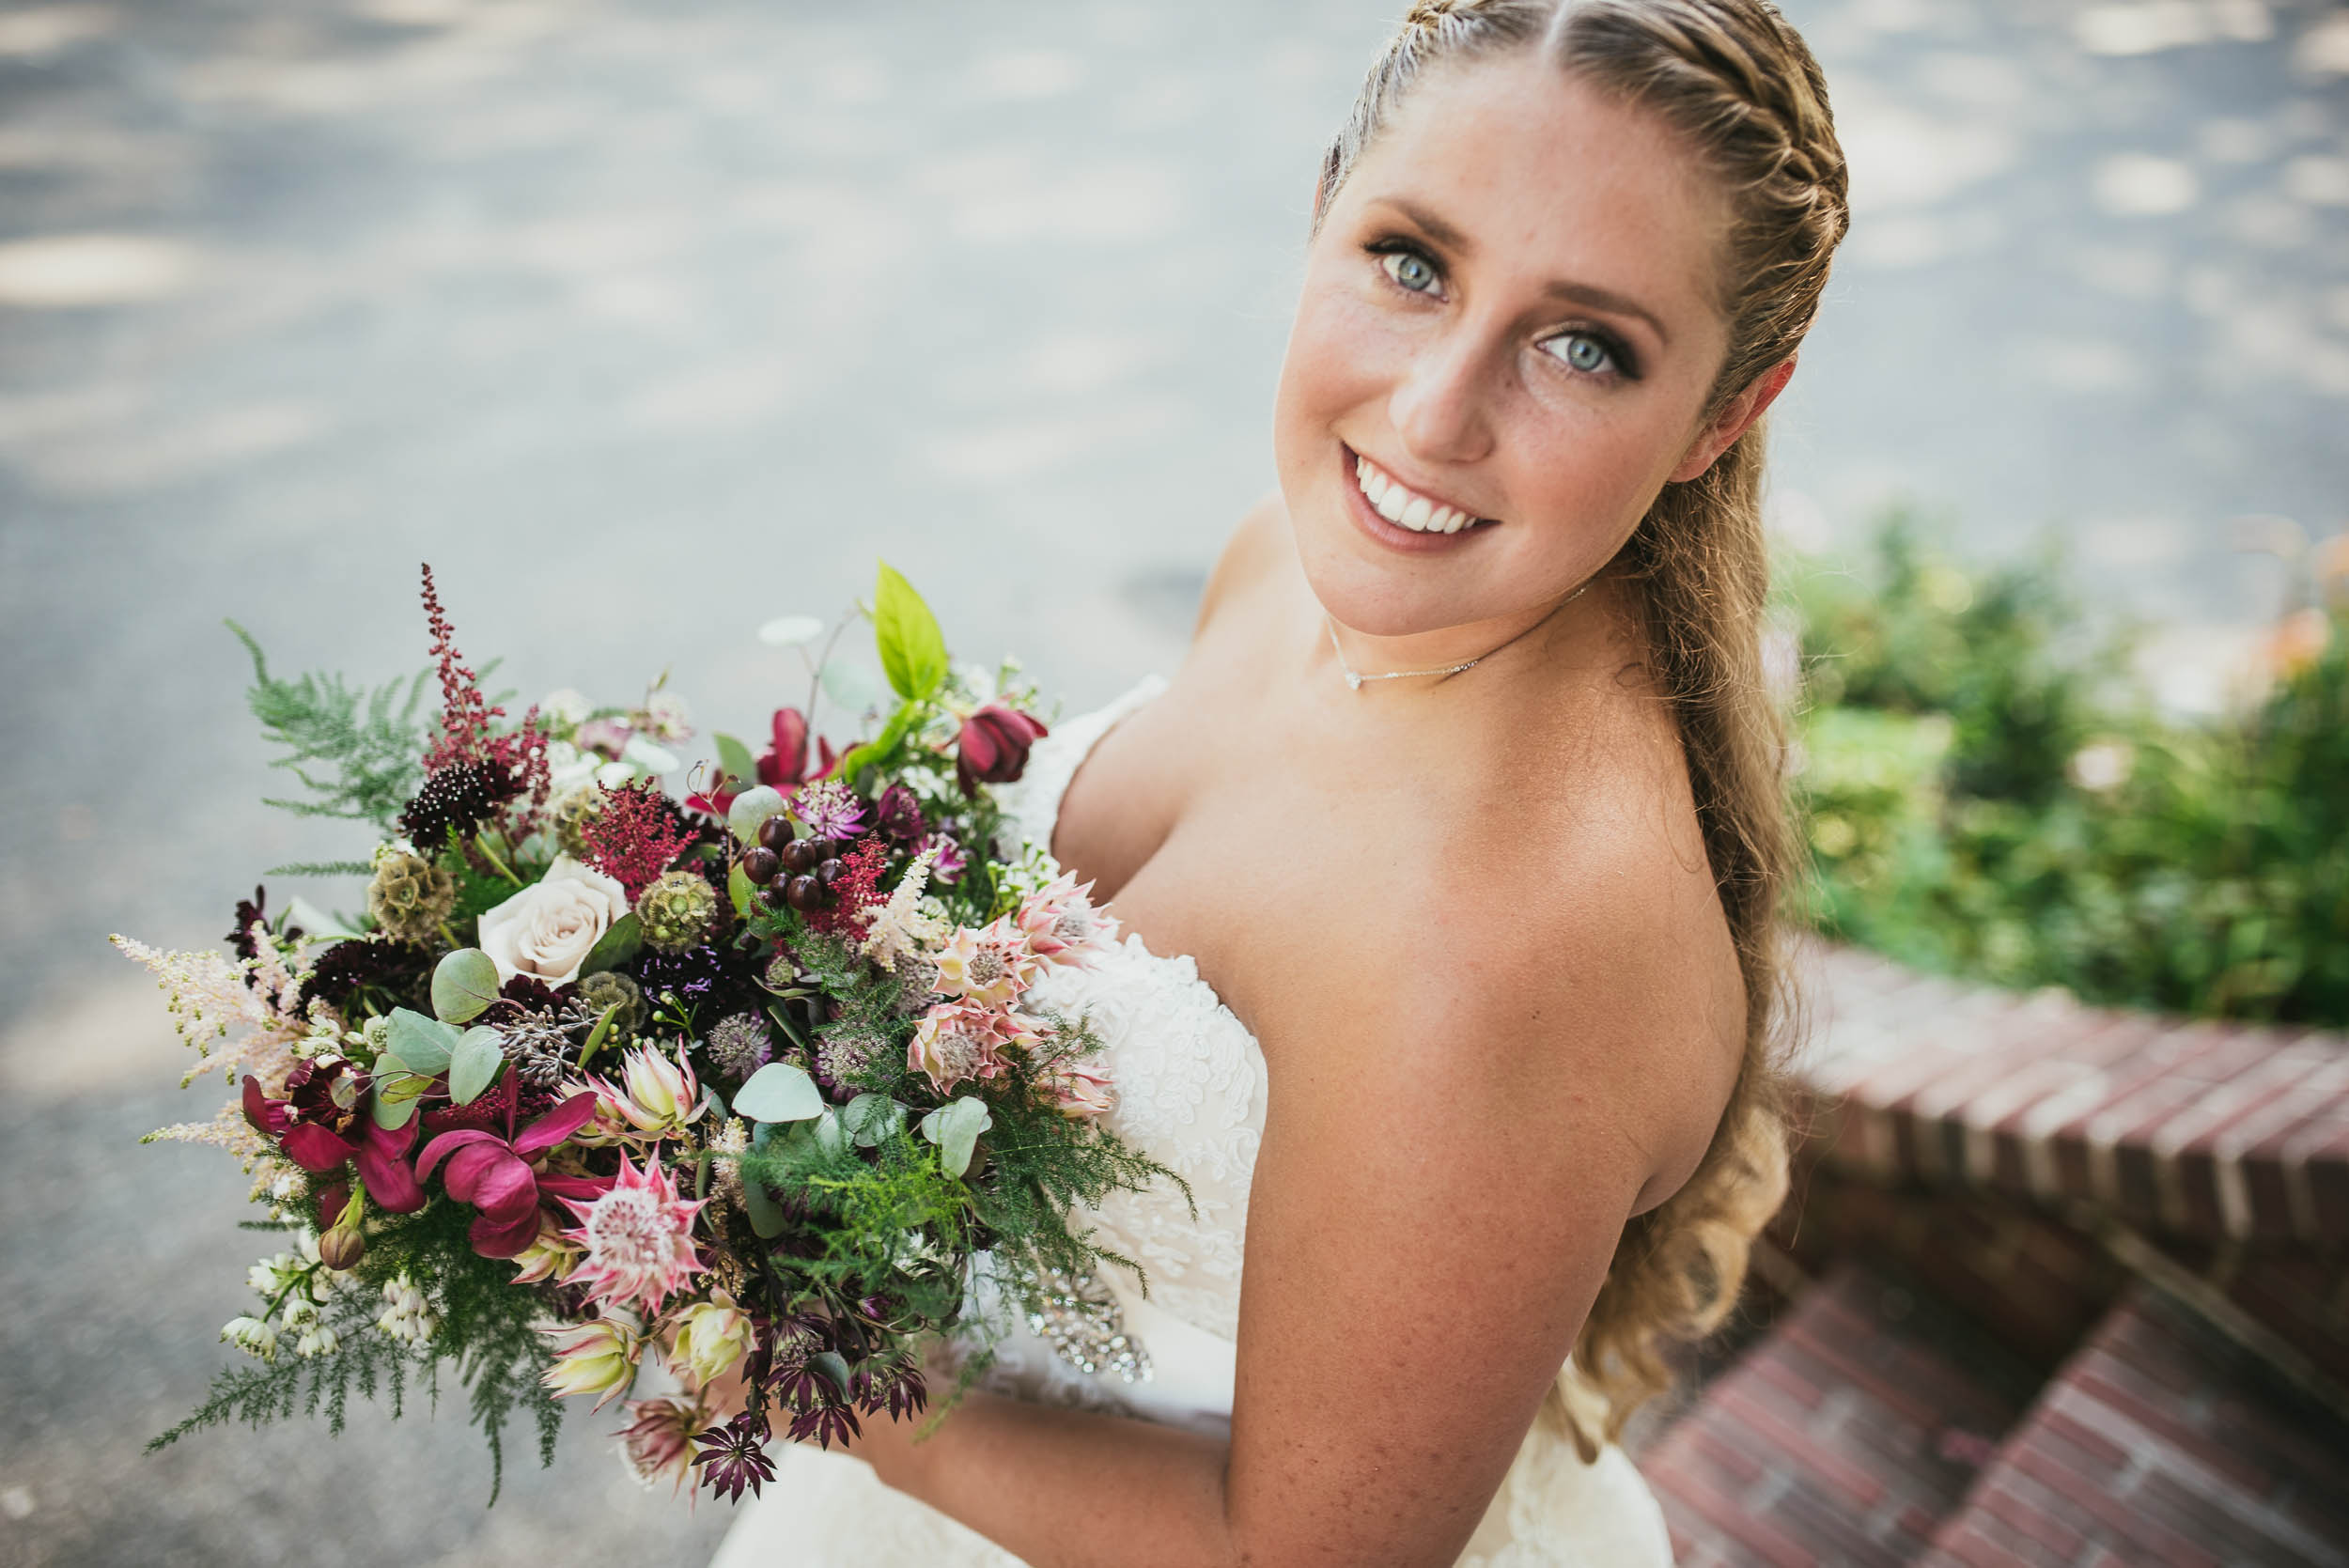 hengstenbergs-florist-kate-andrew-©in-focus-nyc-photography-03.jpg